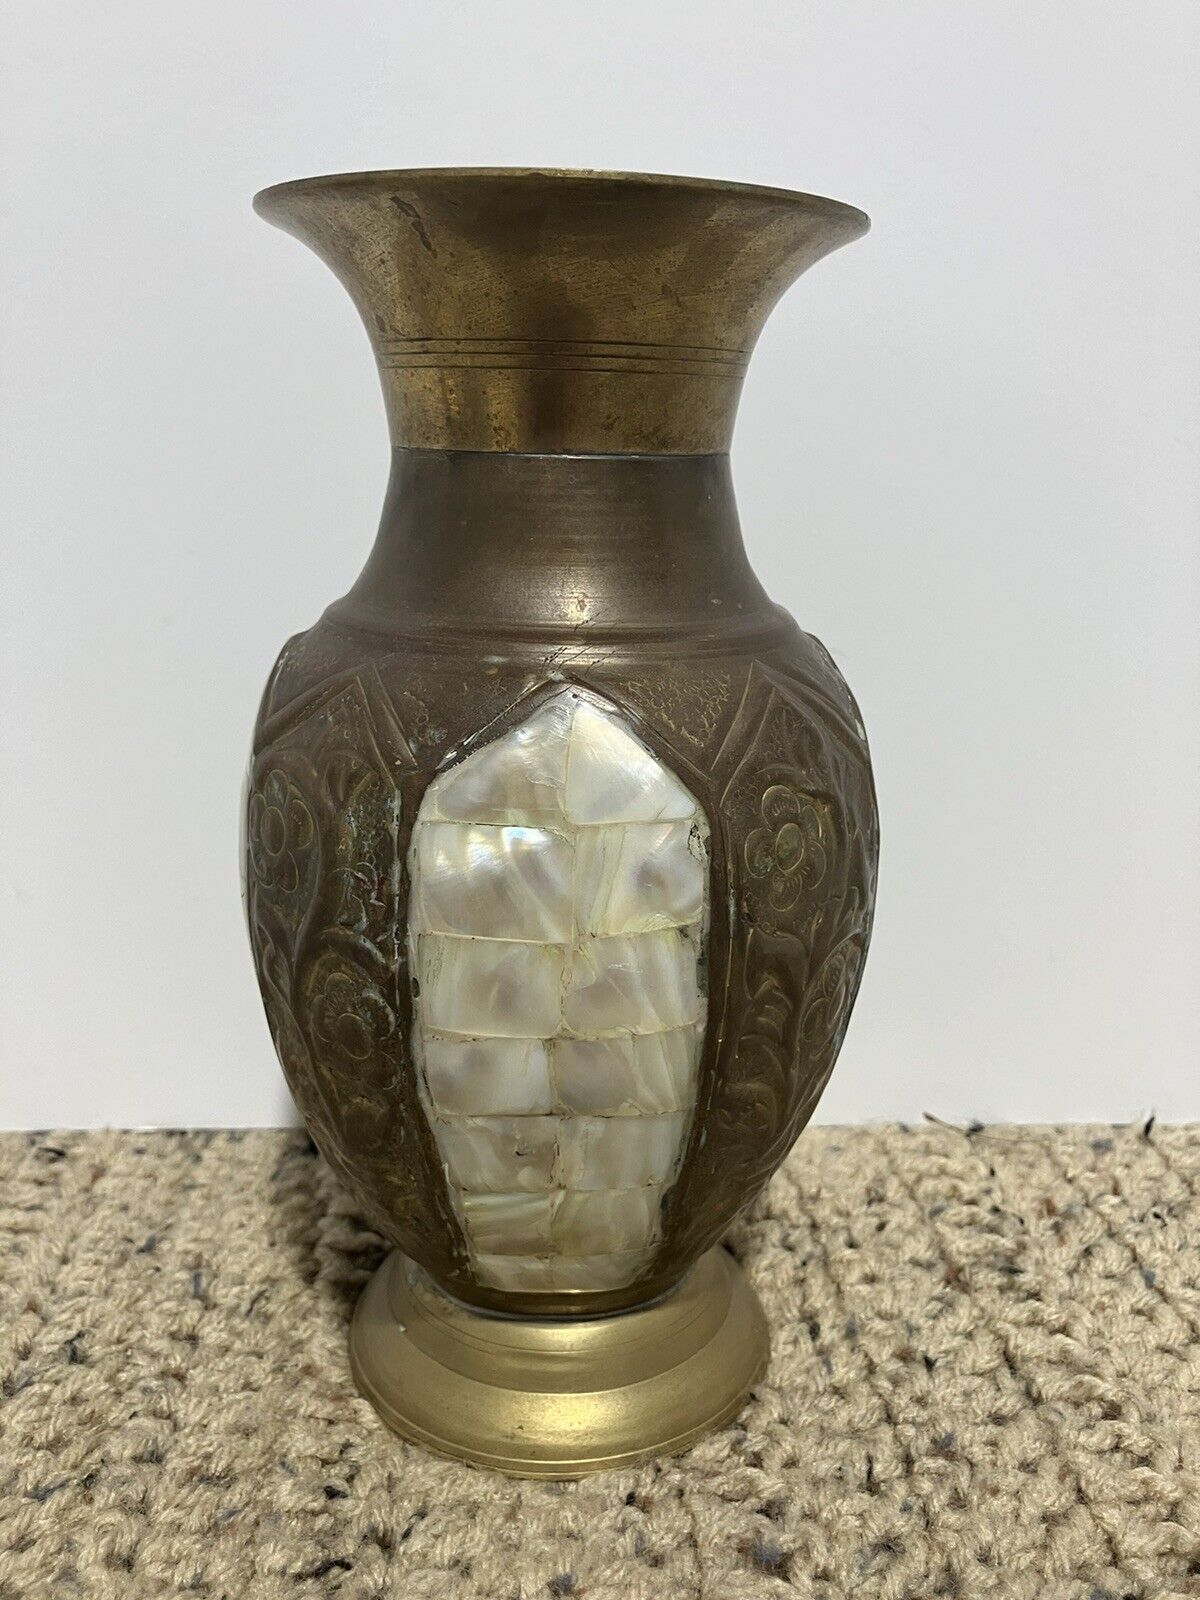 Beautiful Vintage Brass Vase w/Mother of Pearl Inlay. 8” Tall. India.